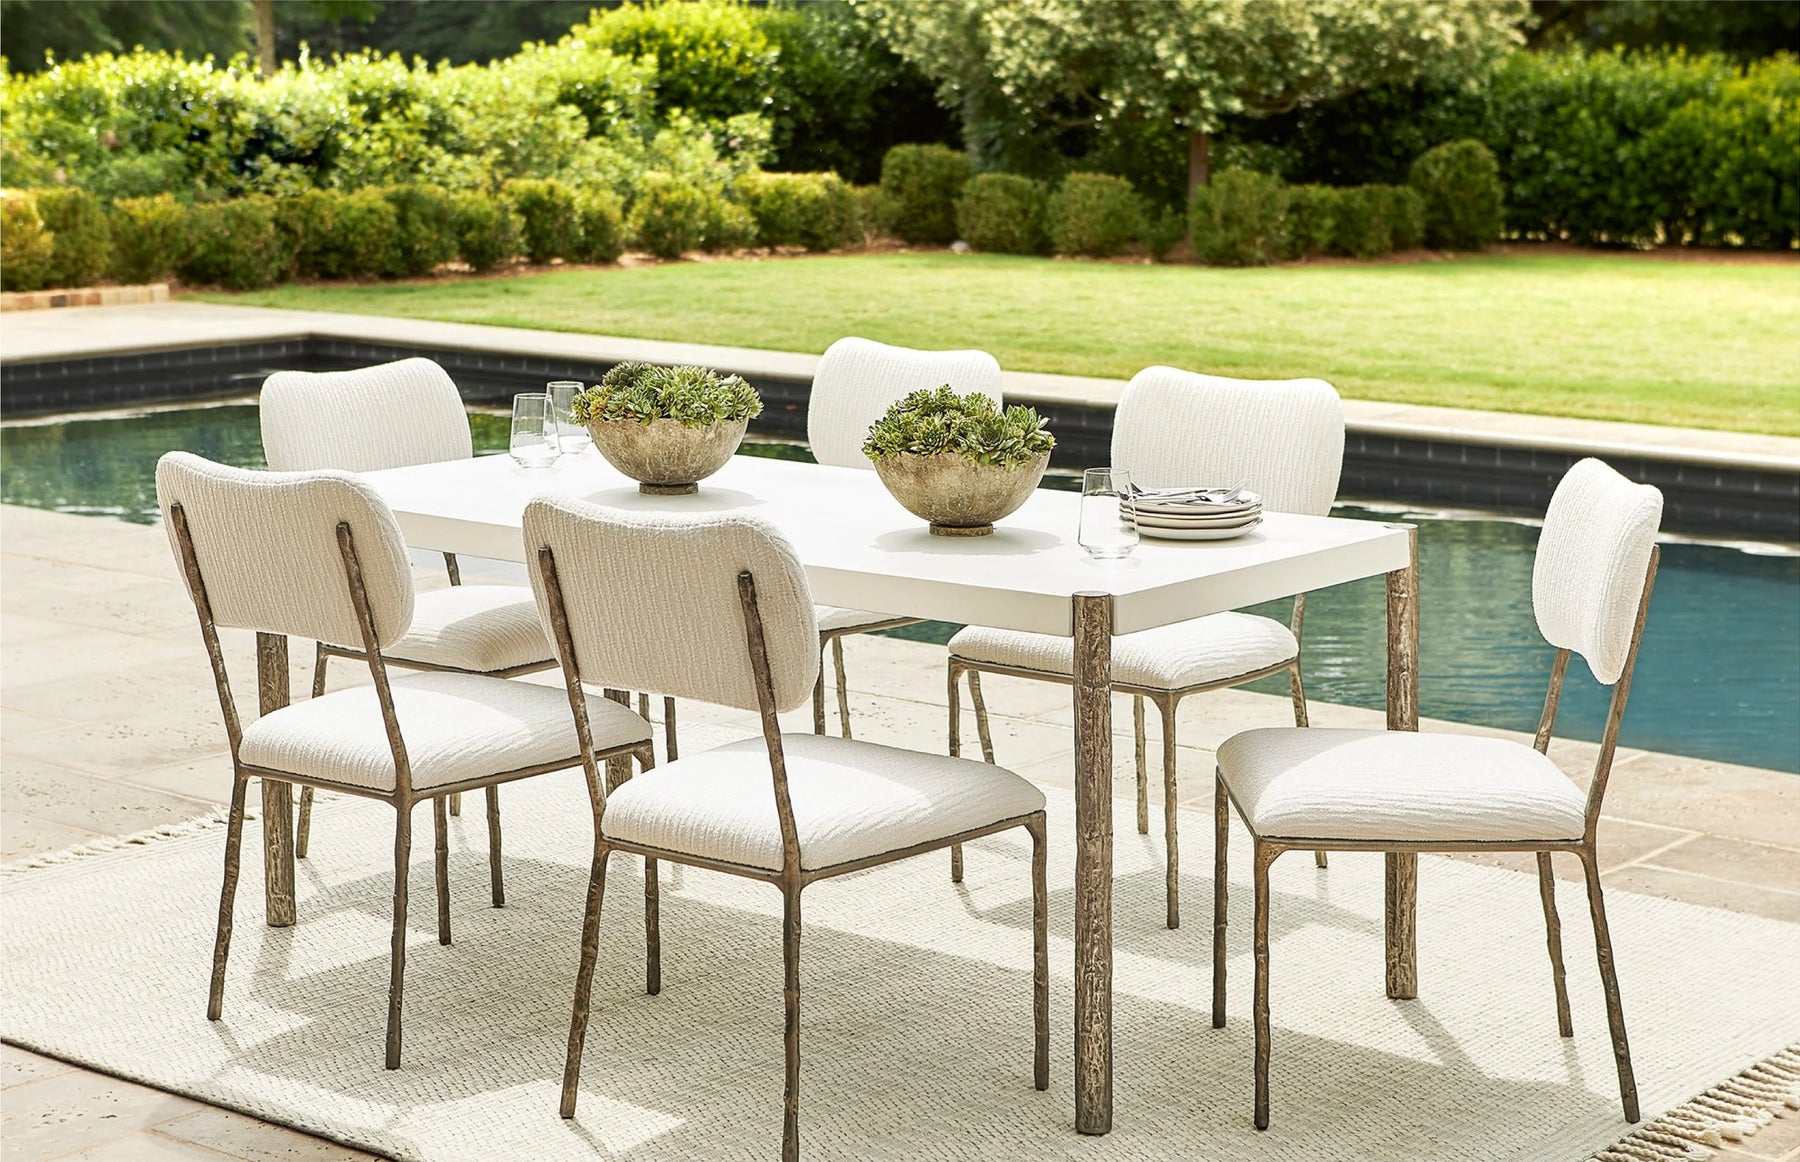 Bernhardt: Perfecting Your Spring Outdoor Gatherings